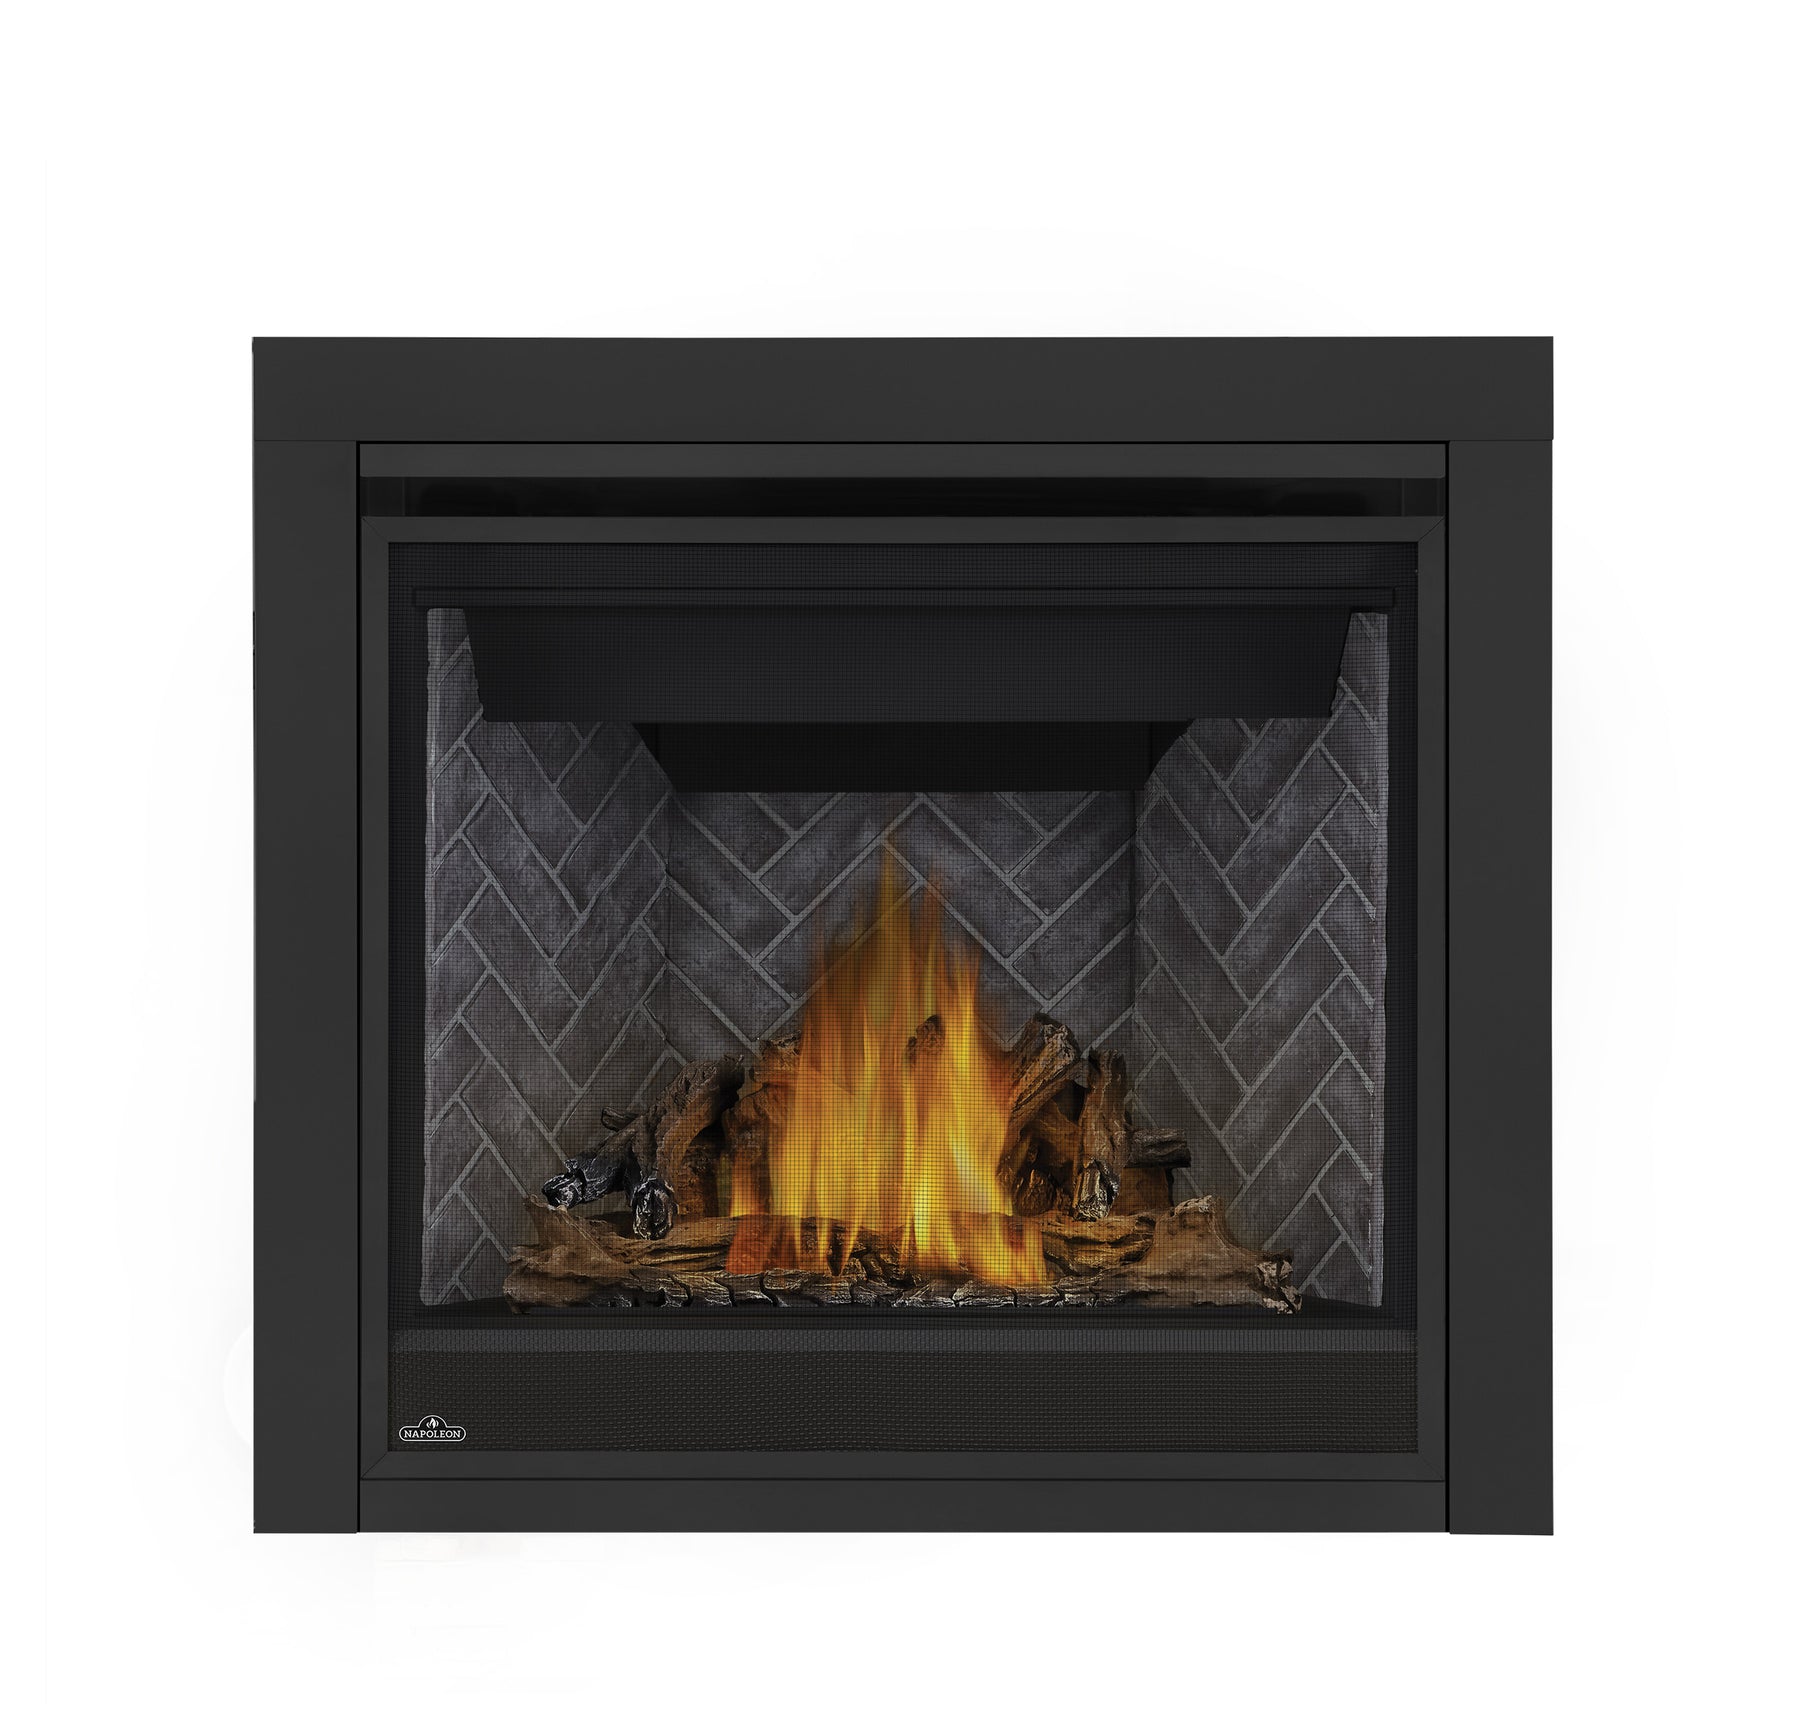 Ascent™ X 36 Direct Vent Gas Fireplace